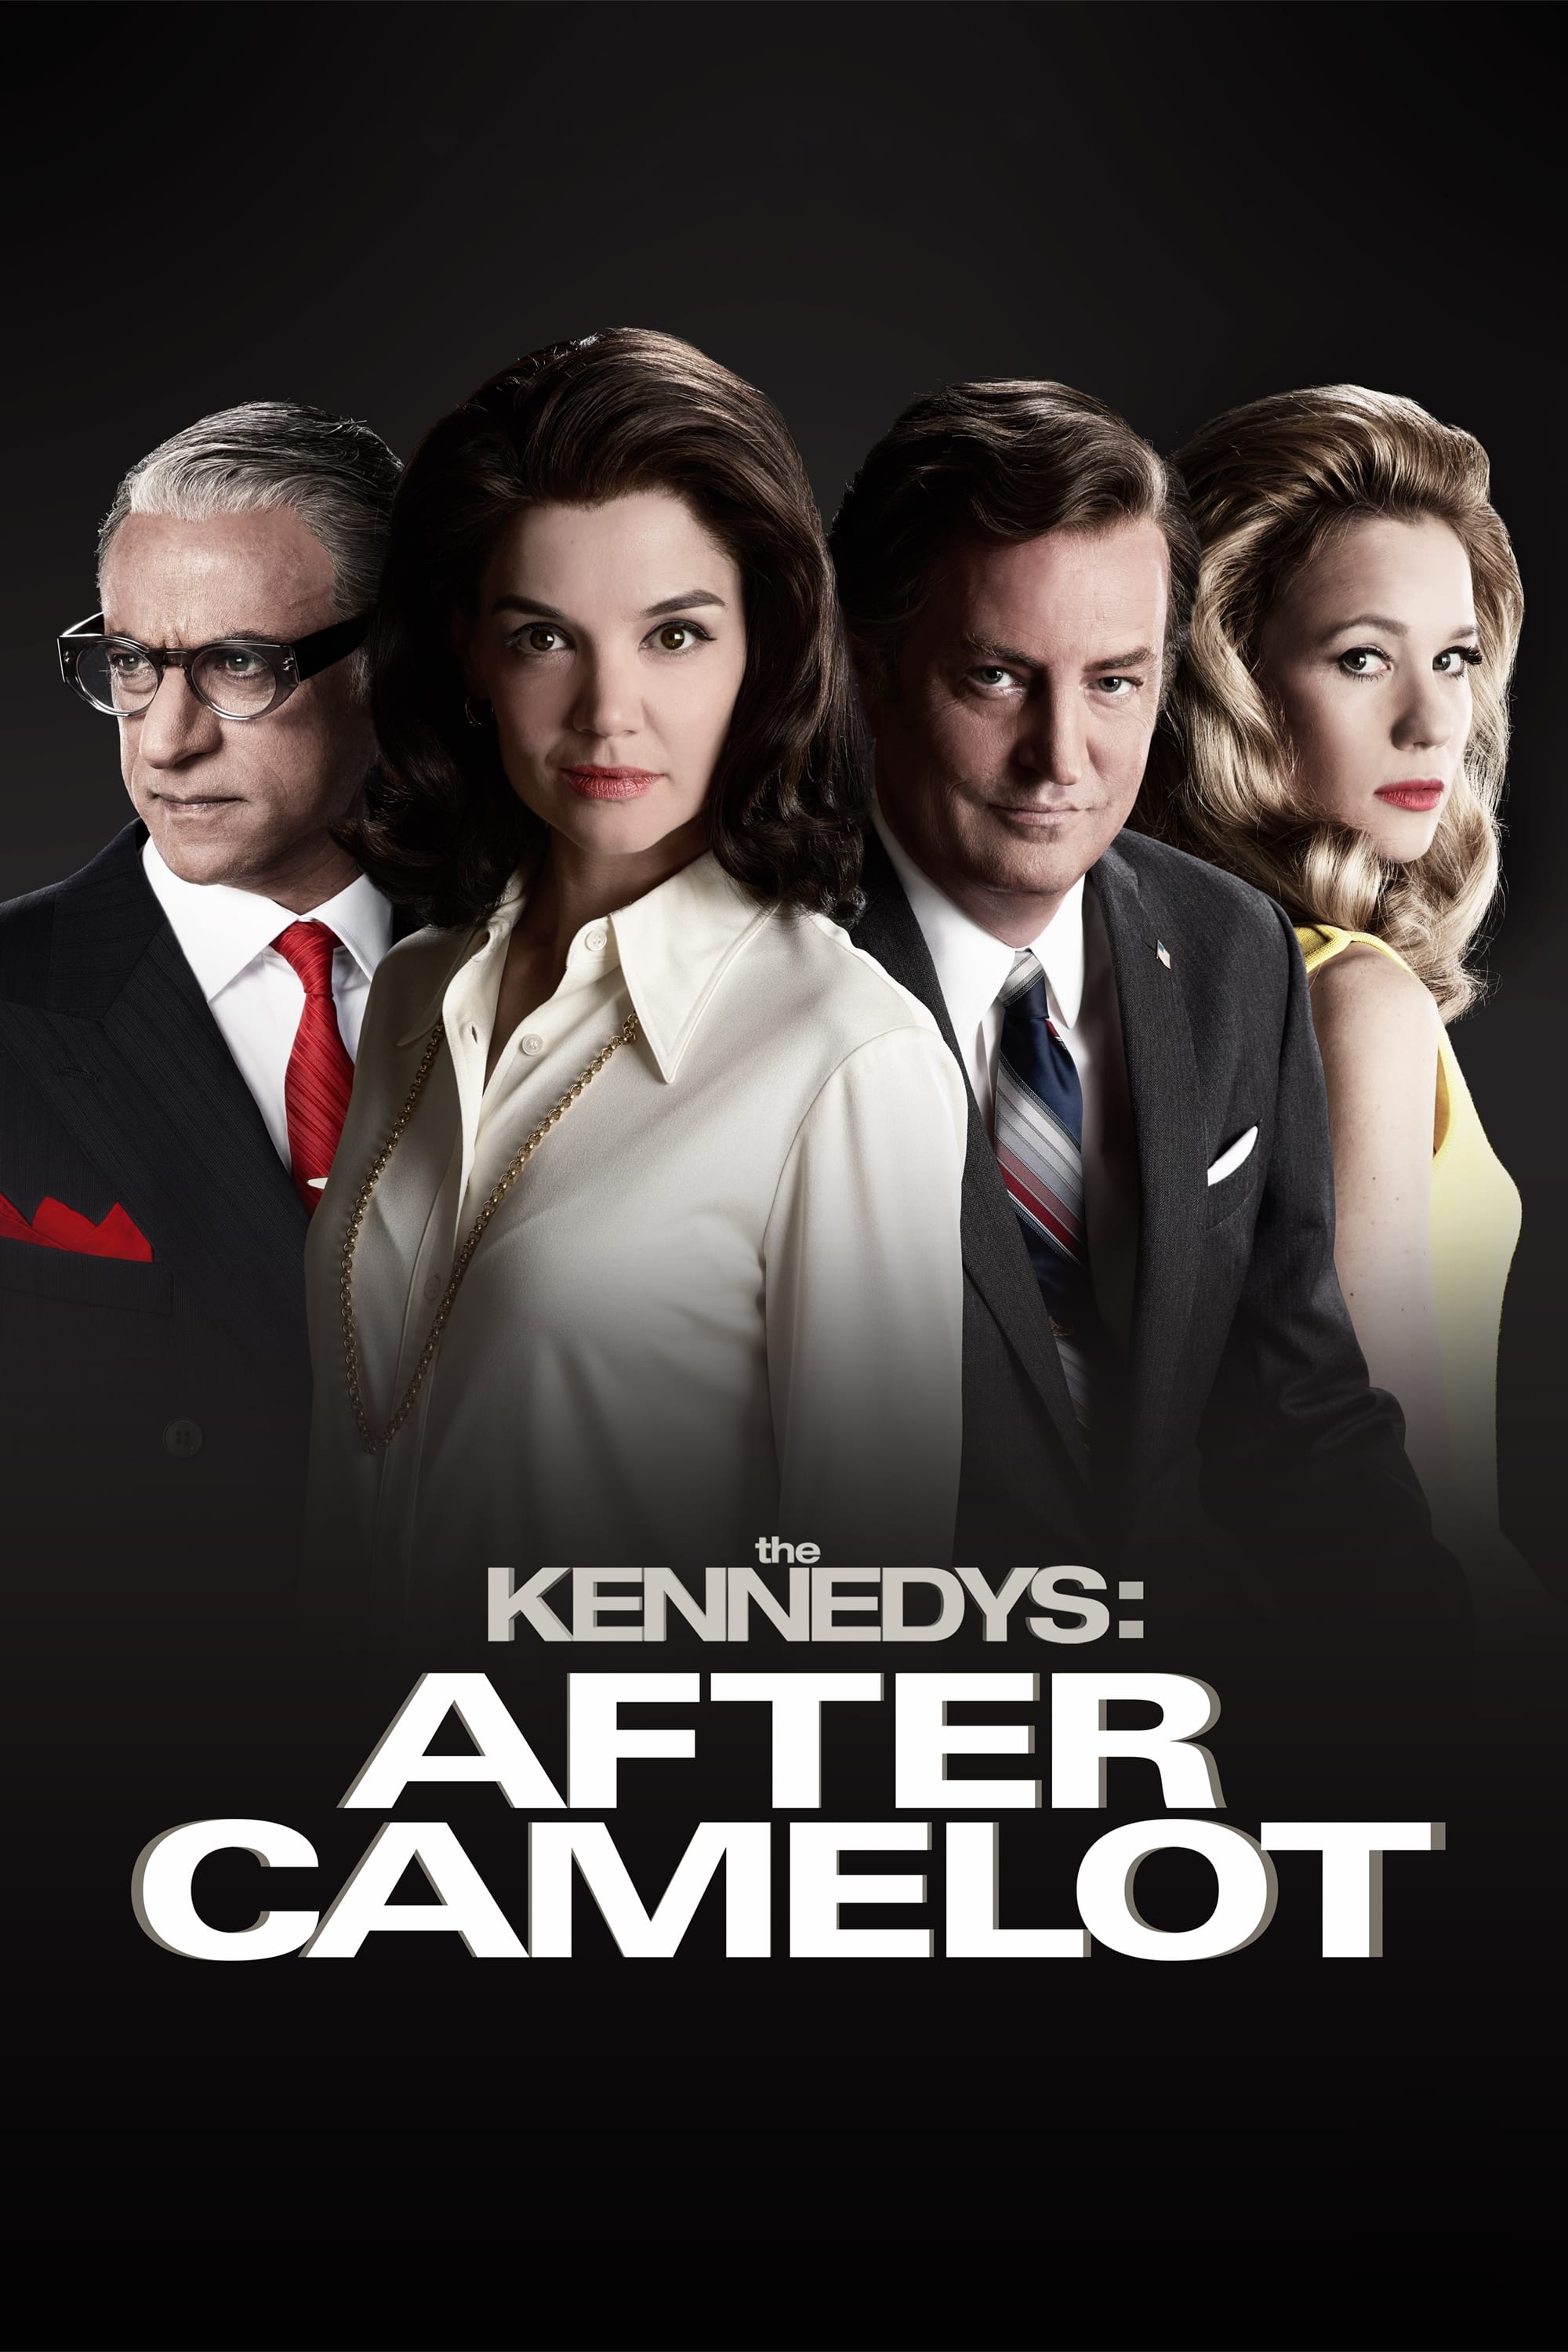 The Kennedys: After Camelot (2017)